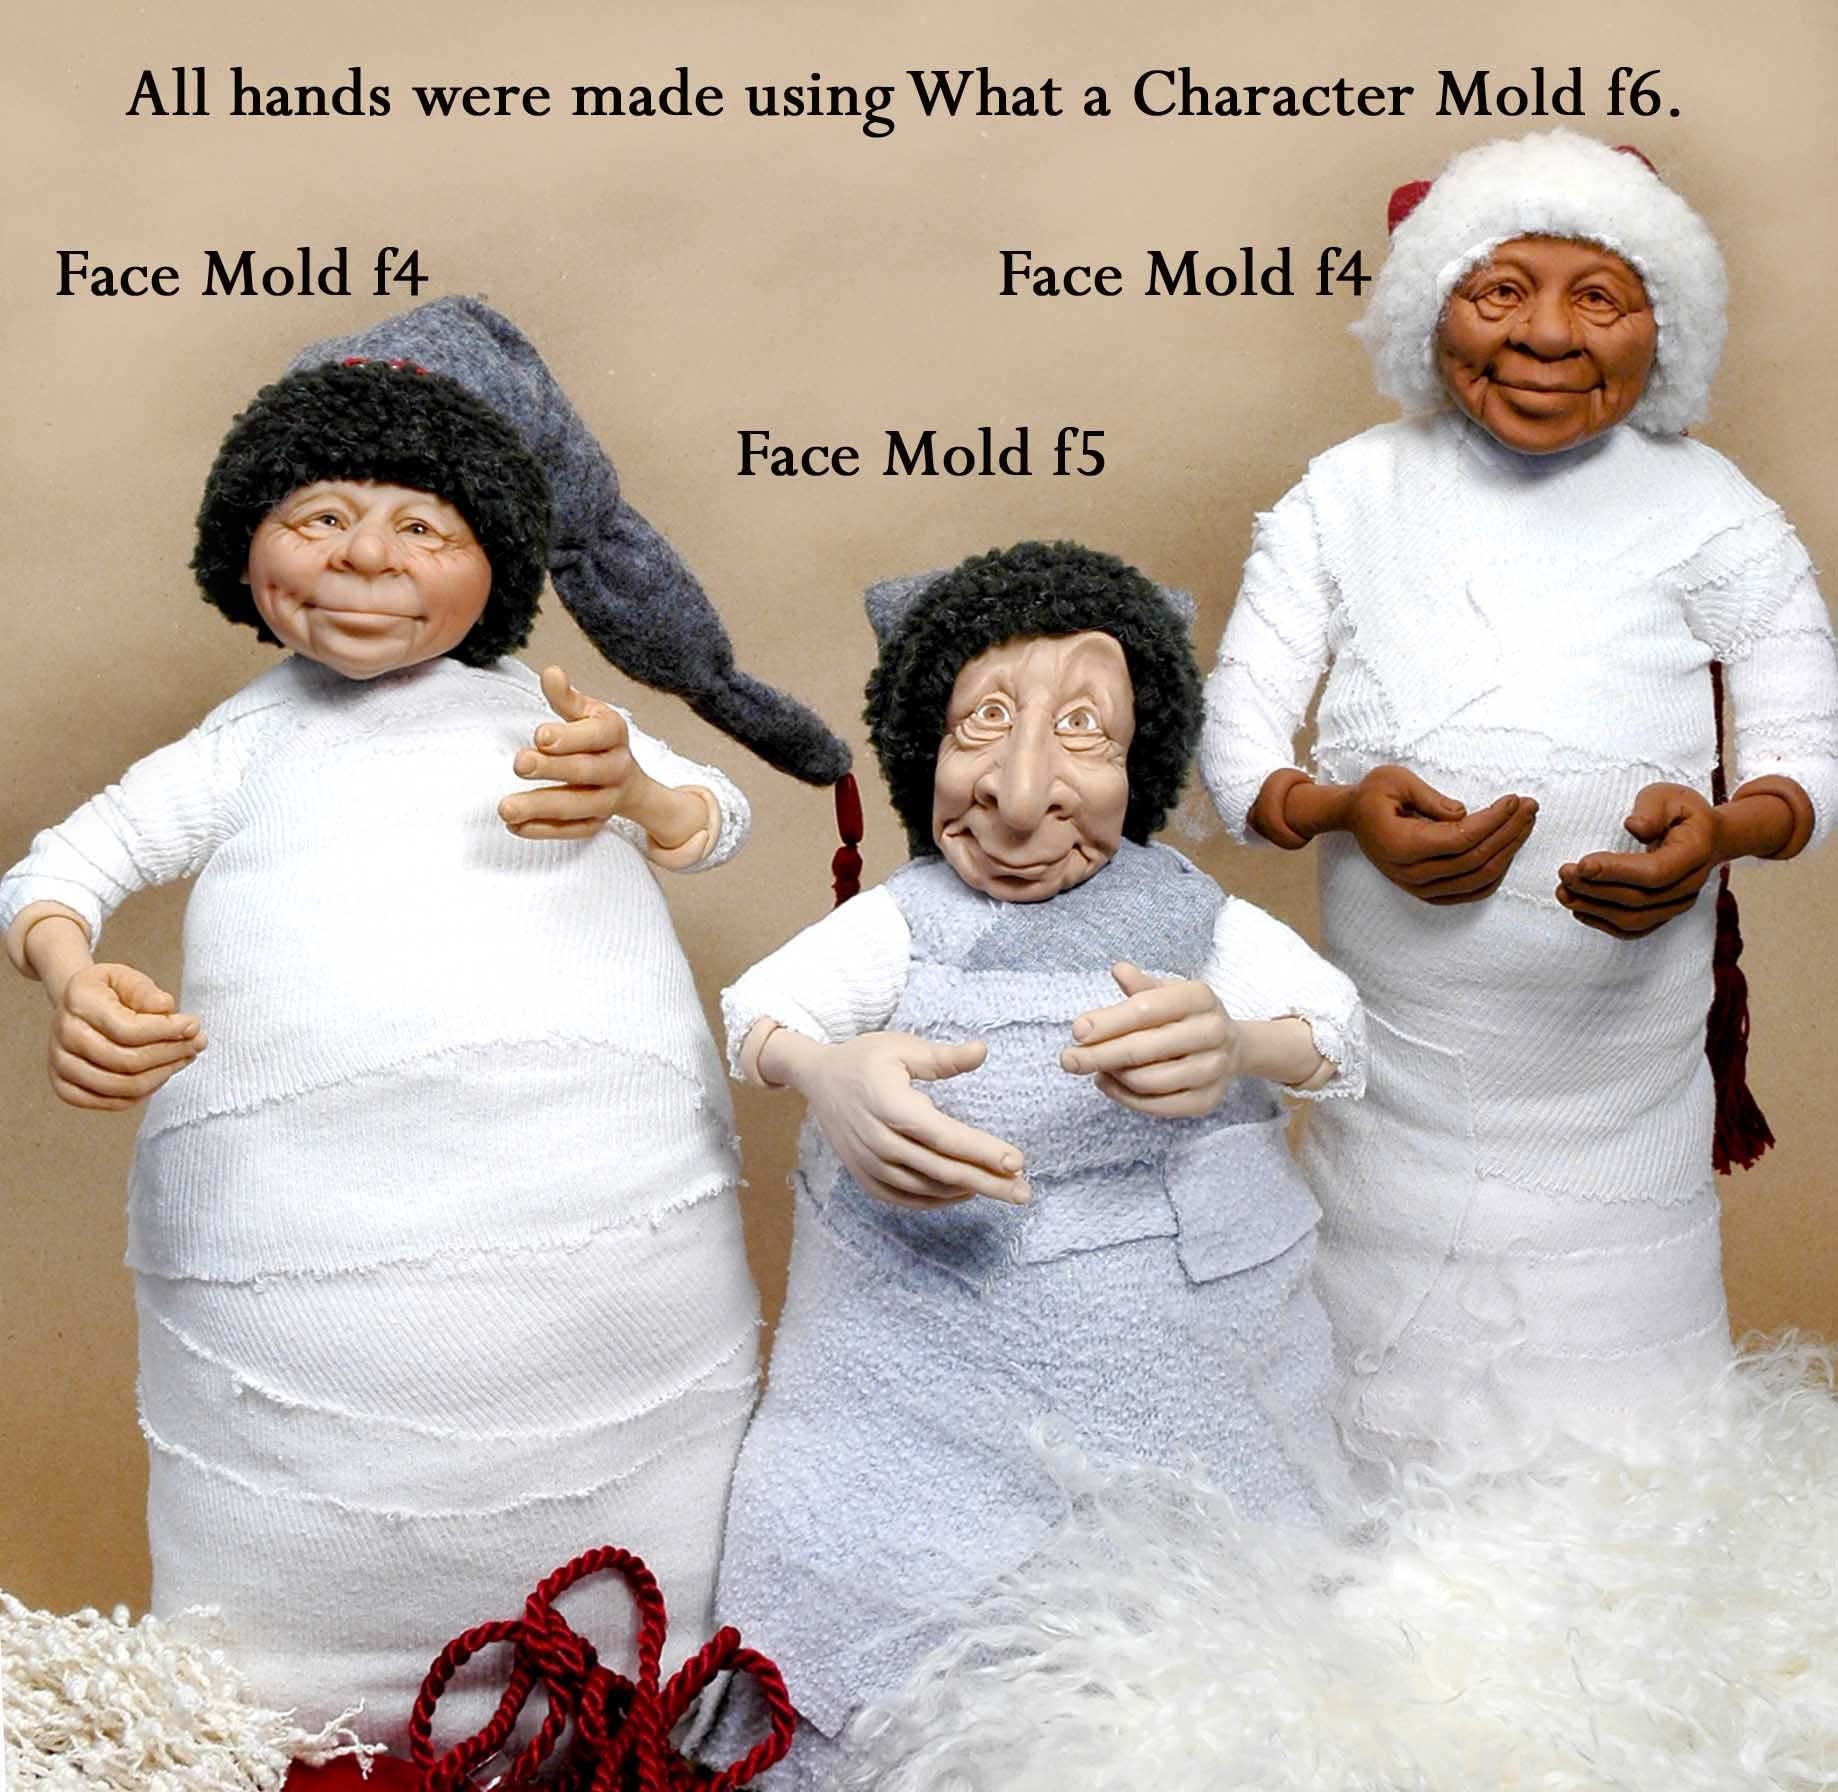 Moldf11h 3/4 to 1 1/2, 5 Small Hand Mold, by Maureen Carlson. Use With 3/4  2 Face Molds and Foot Mold F12F 